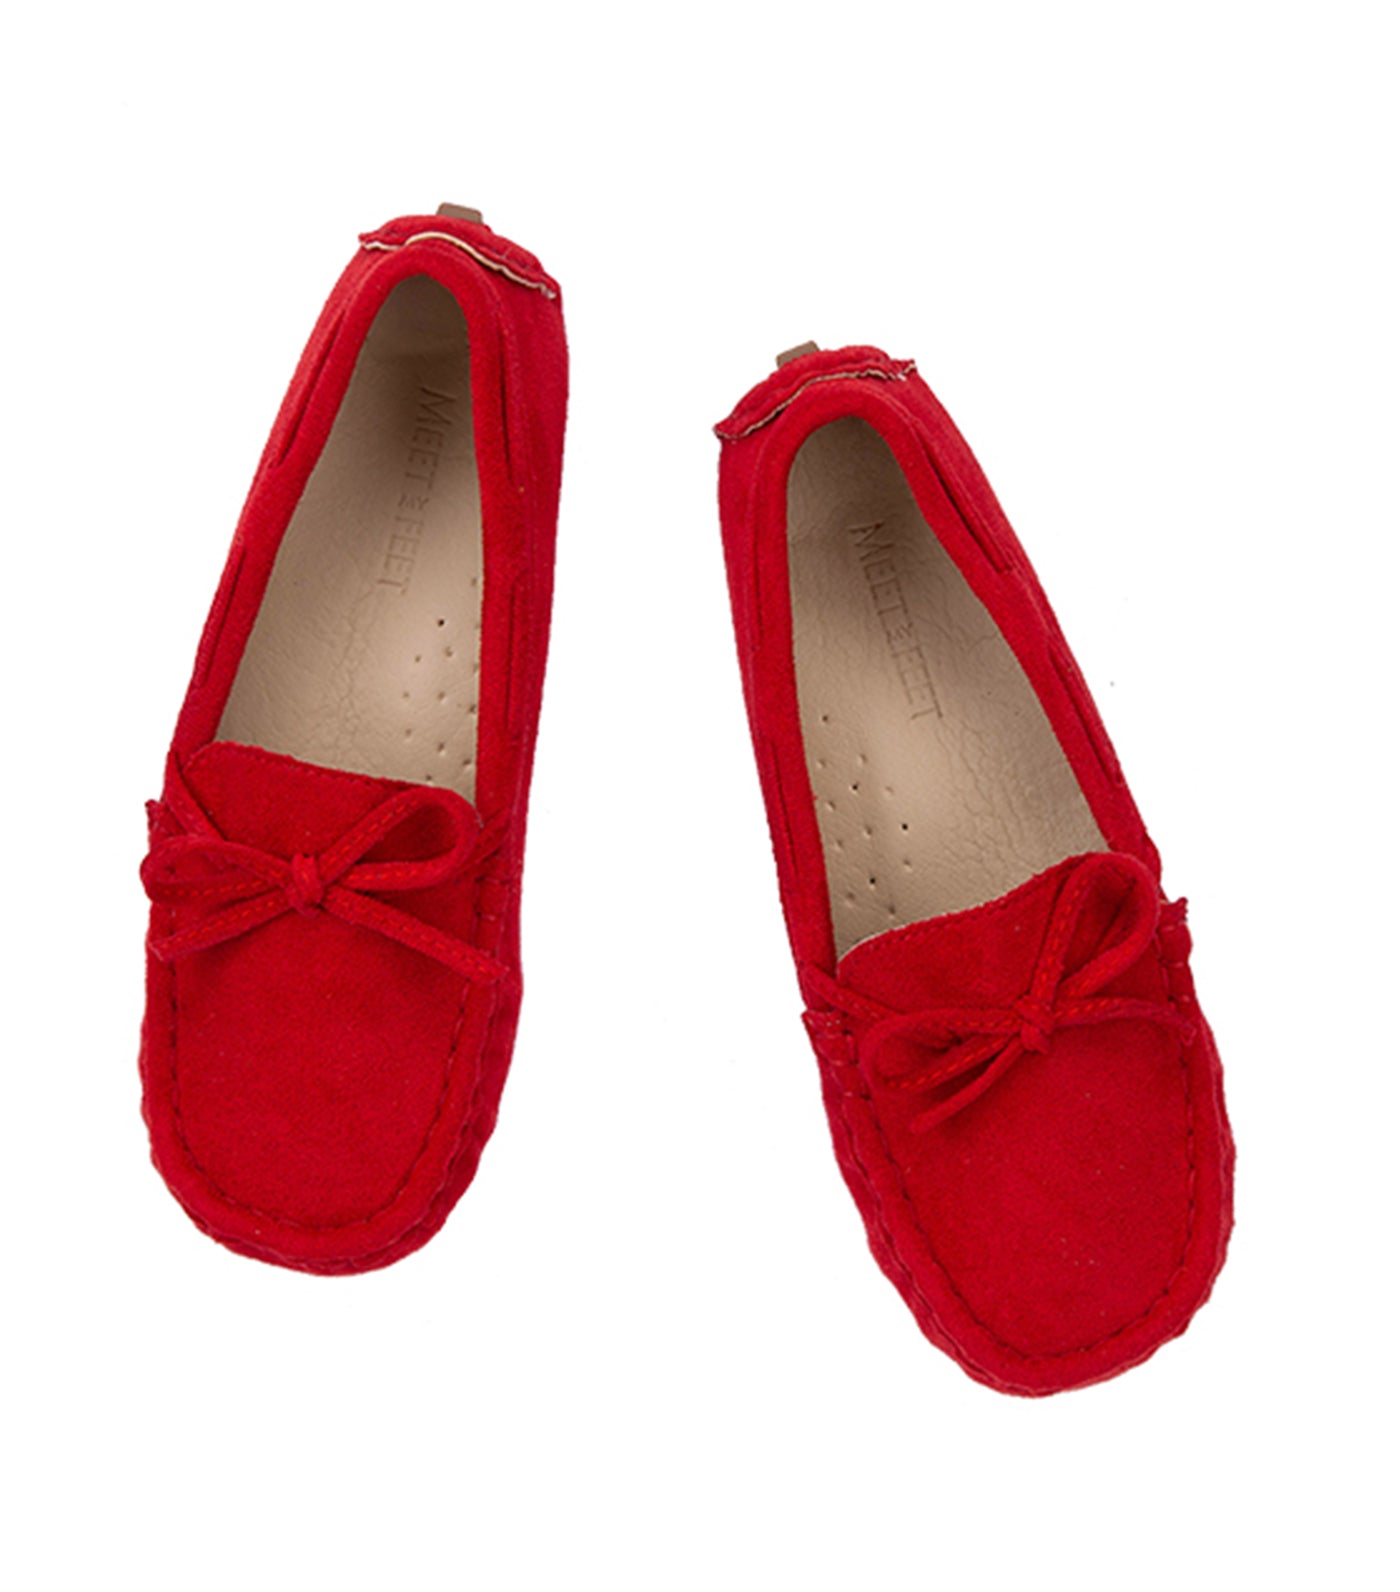 Safi Loafers for Boys - Red